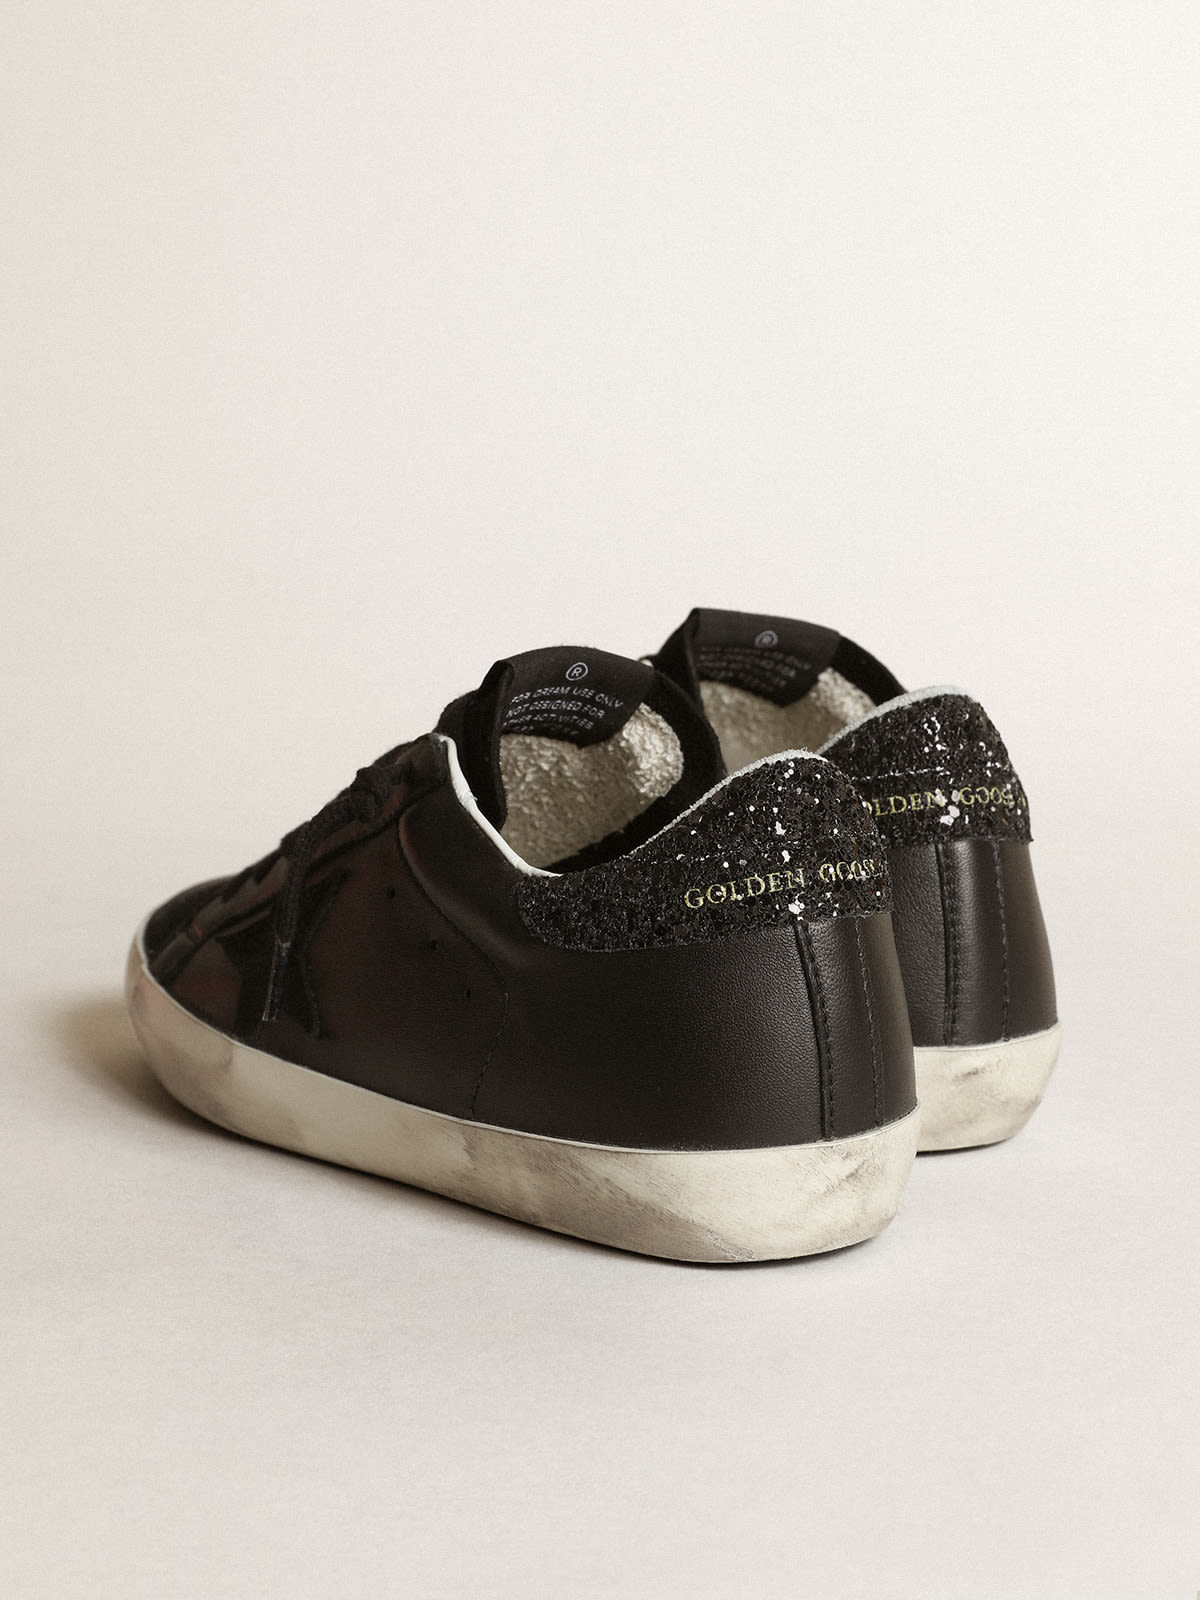 Golden Goose - Super-Star in black nappa with black star and glitter heel tab in 